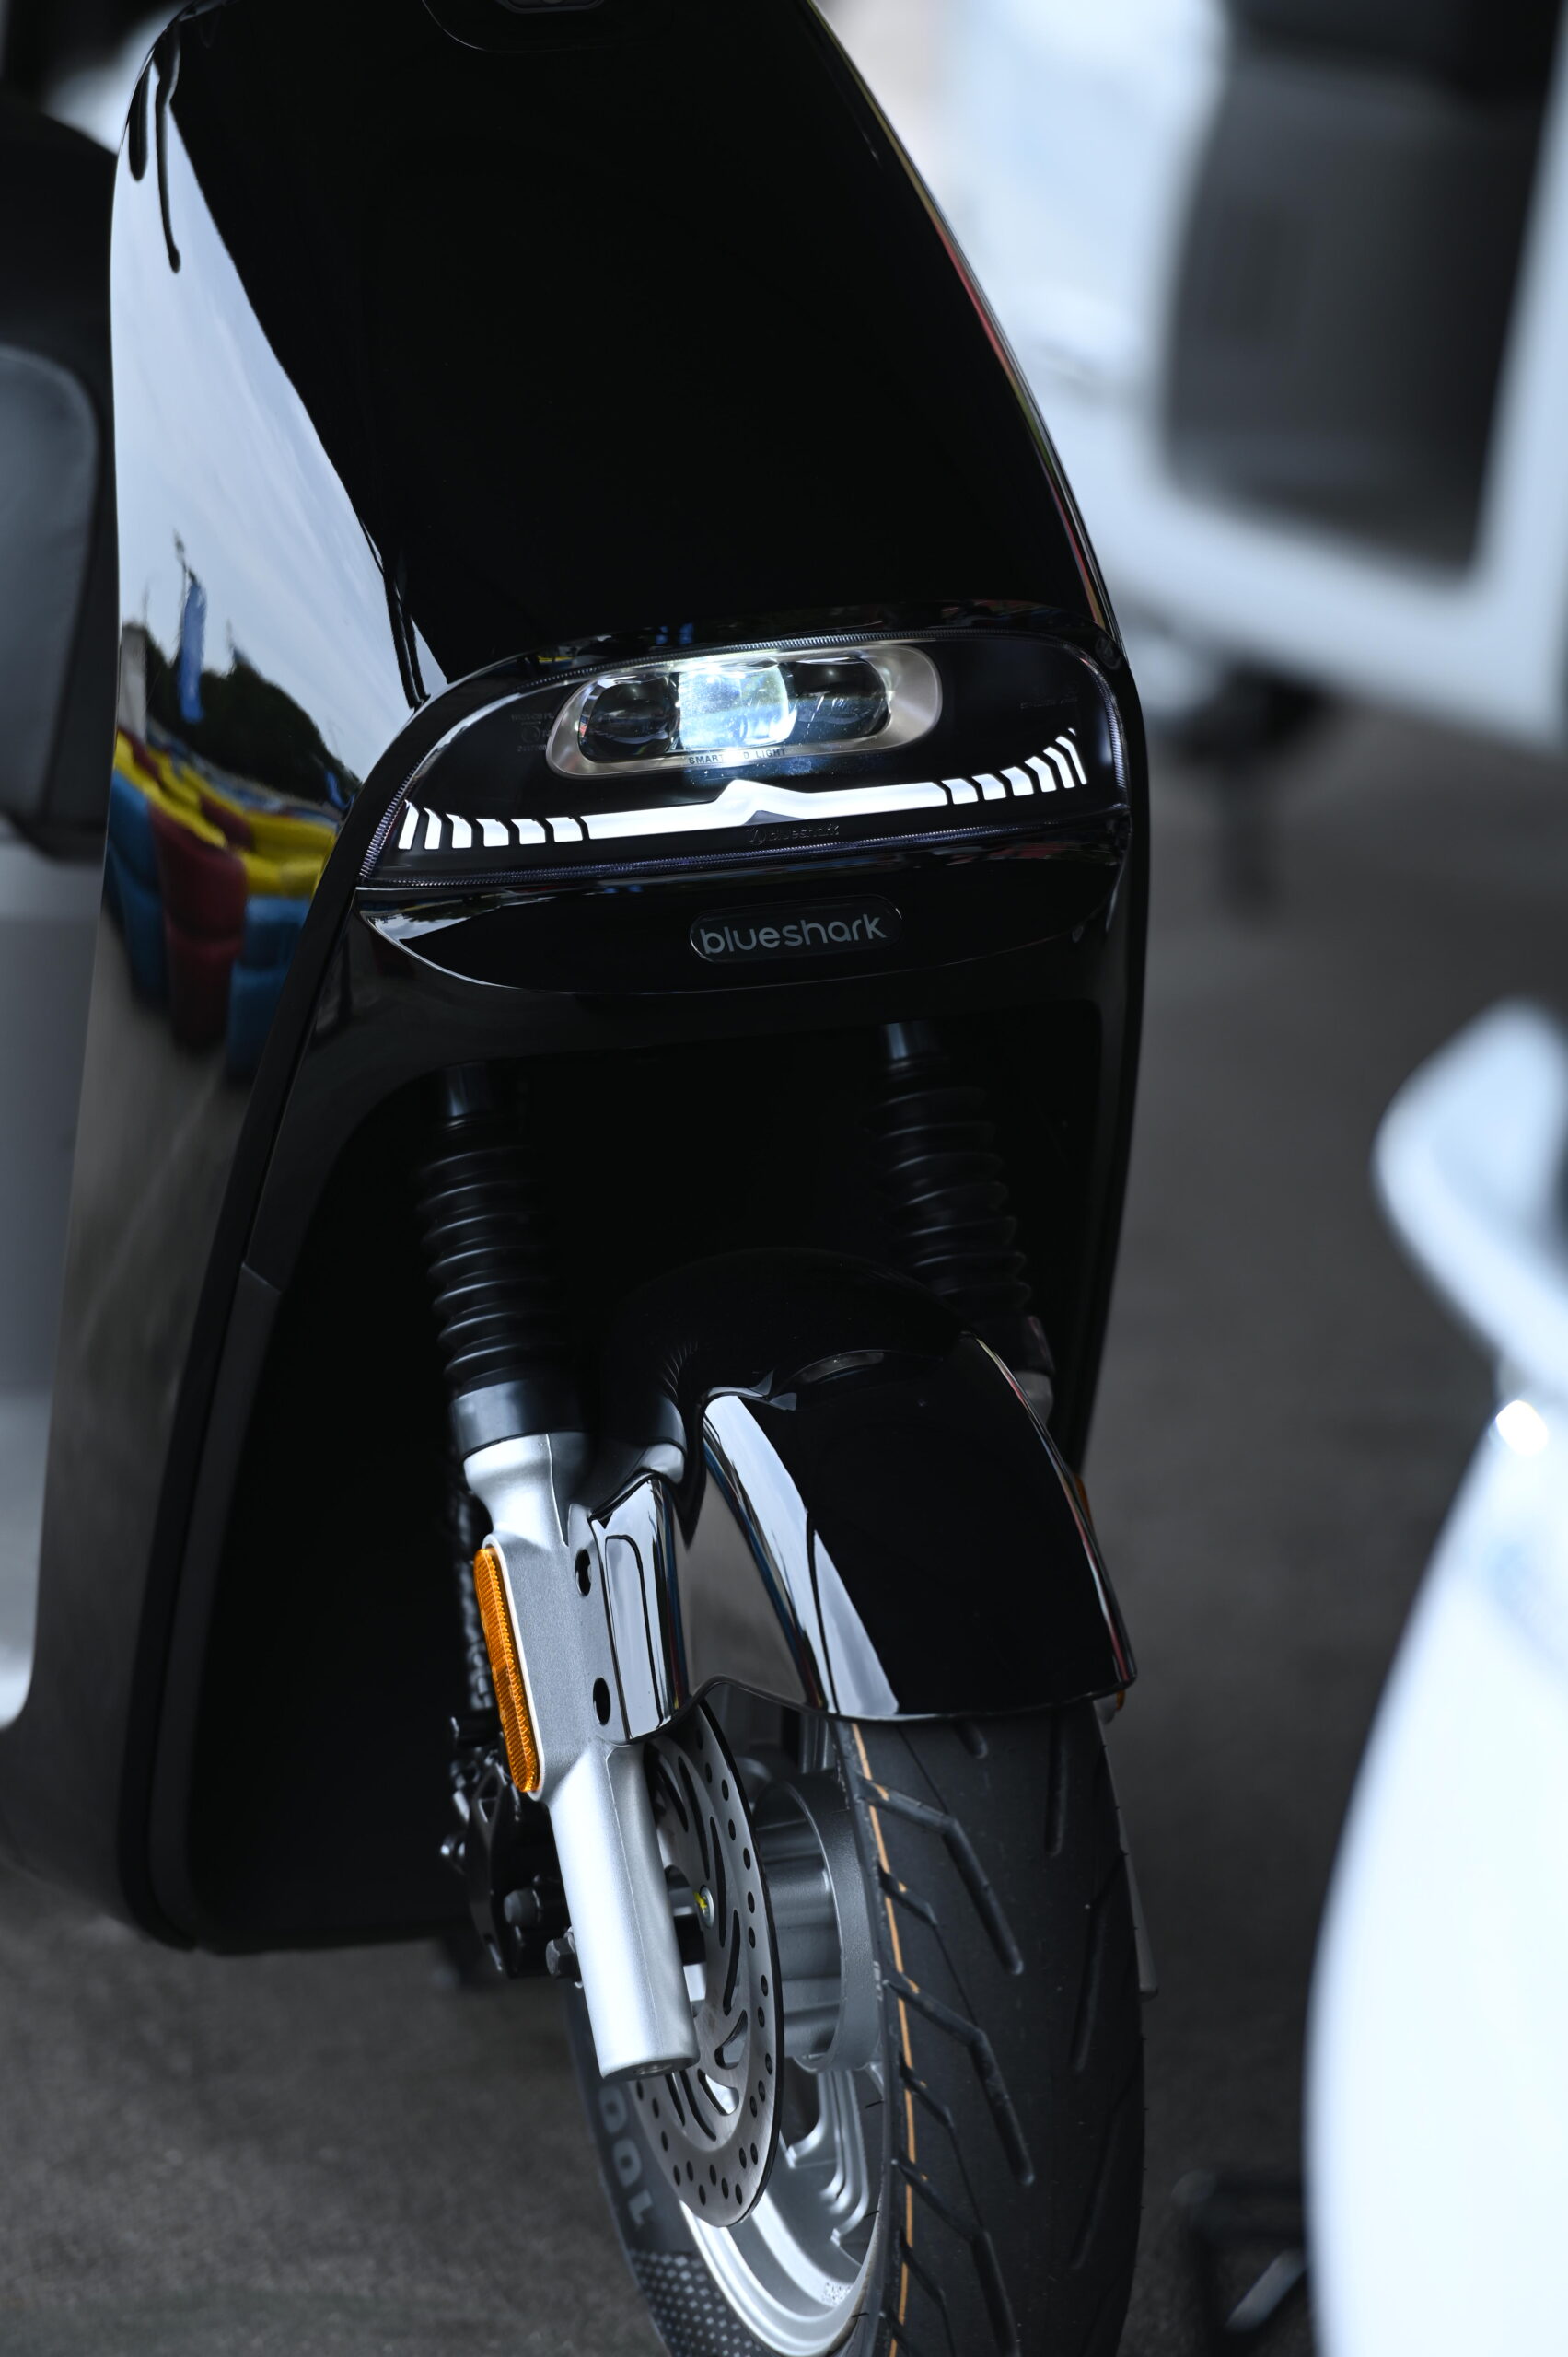 14. Bluesharks smart electric scooter arrives in Malaysia with cutting edge technology to revolutionise urban mobility. 1 scaled